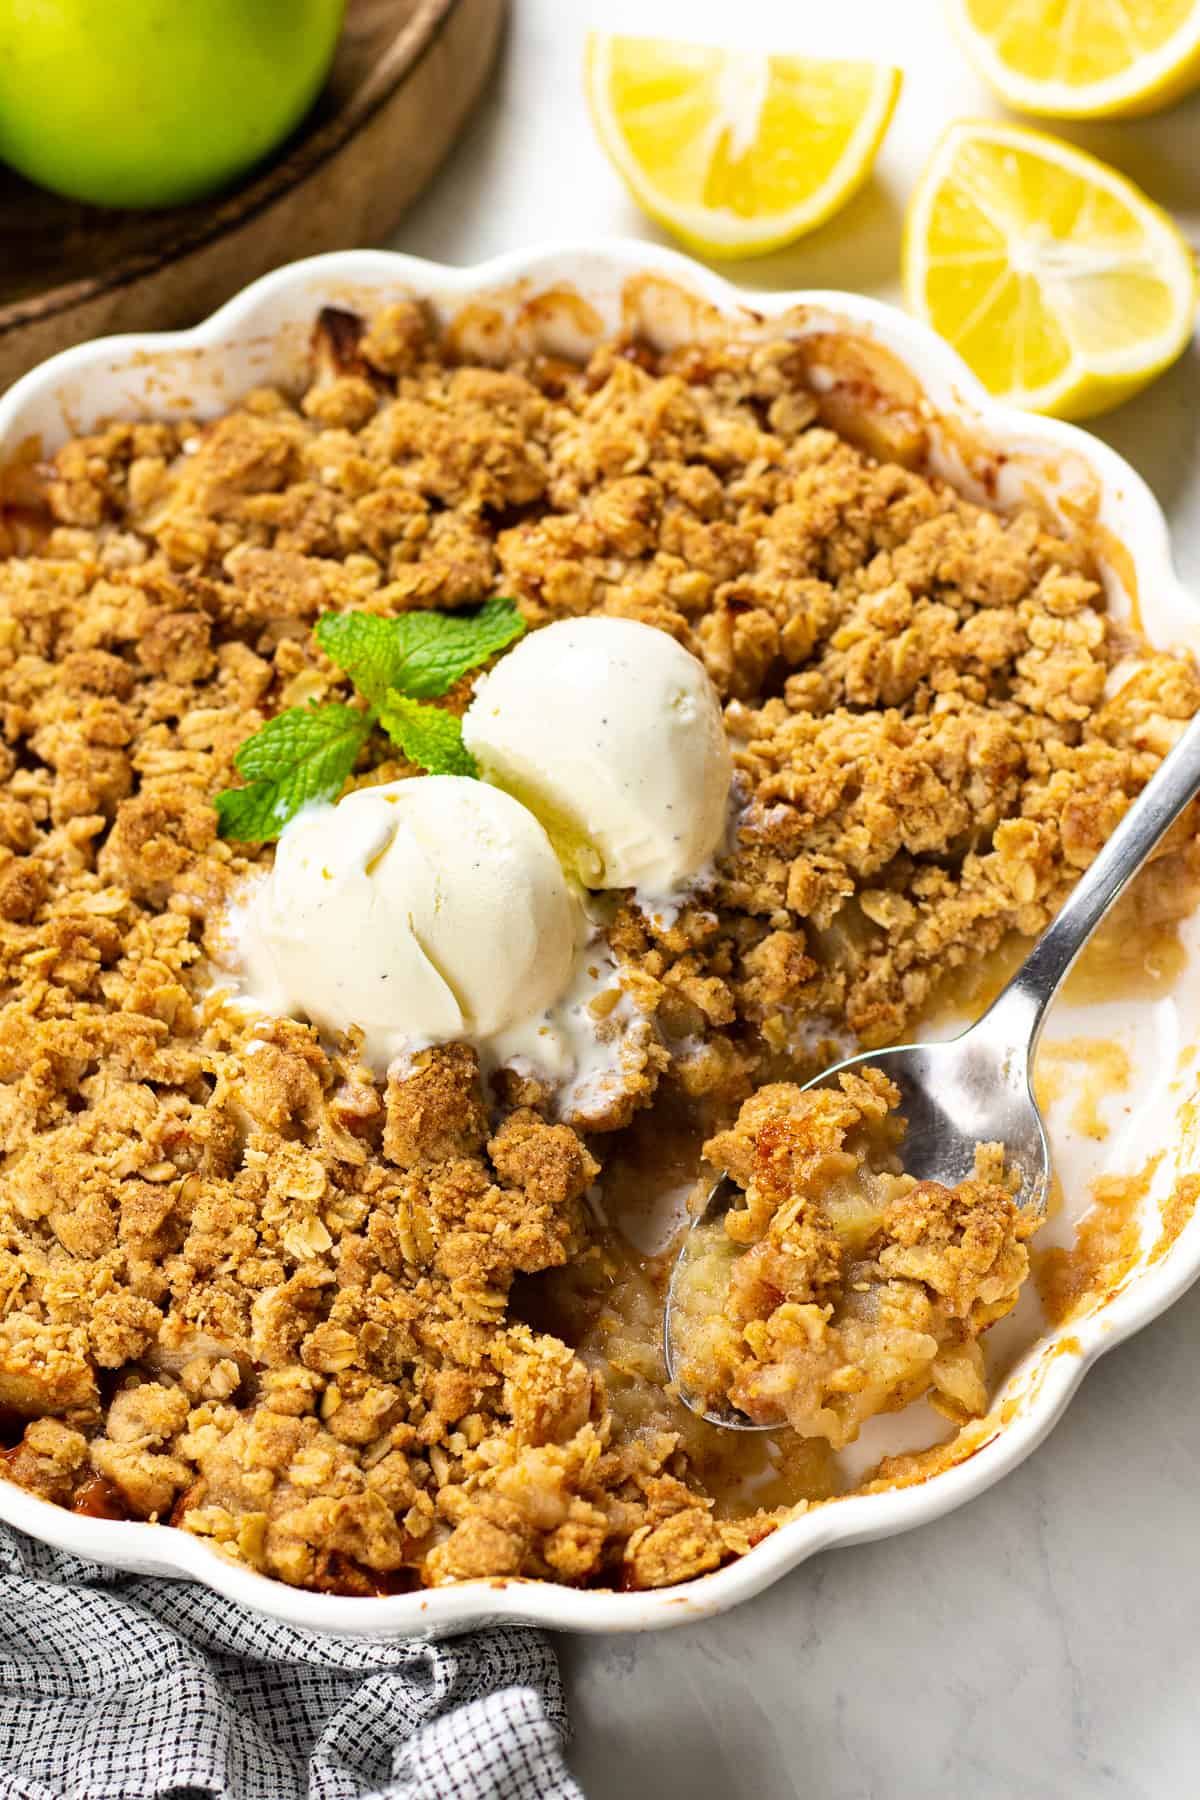 Apple crisp in a white baking pan with a scoop of ice cream on top.